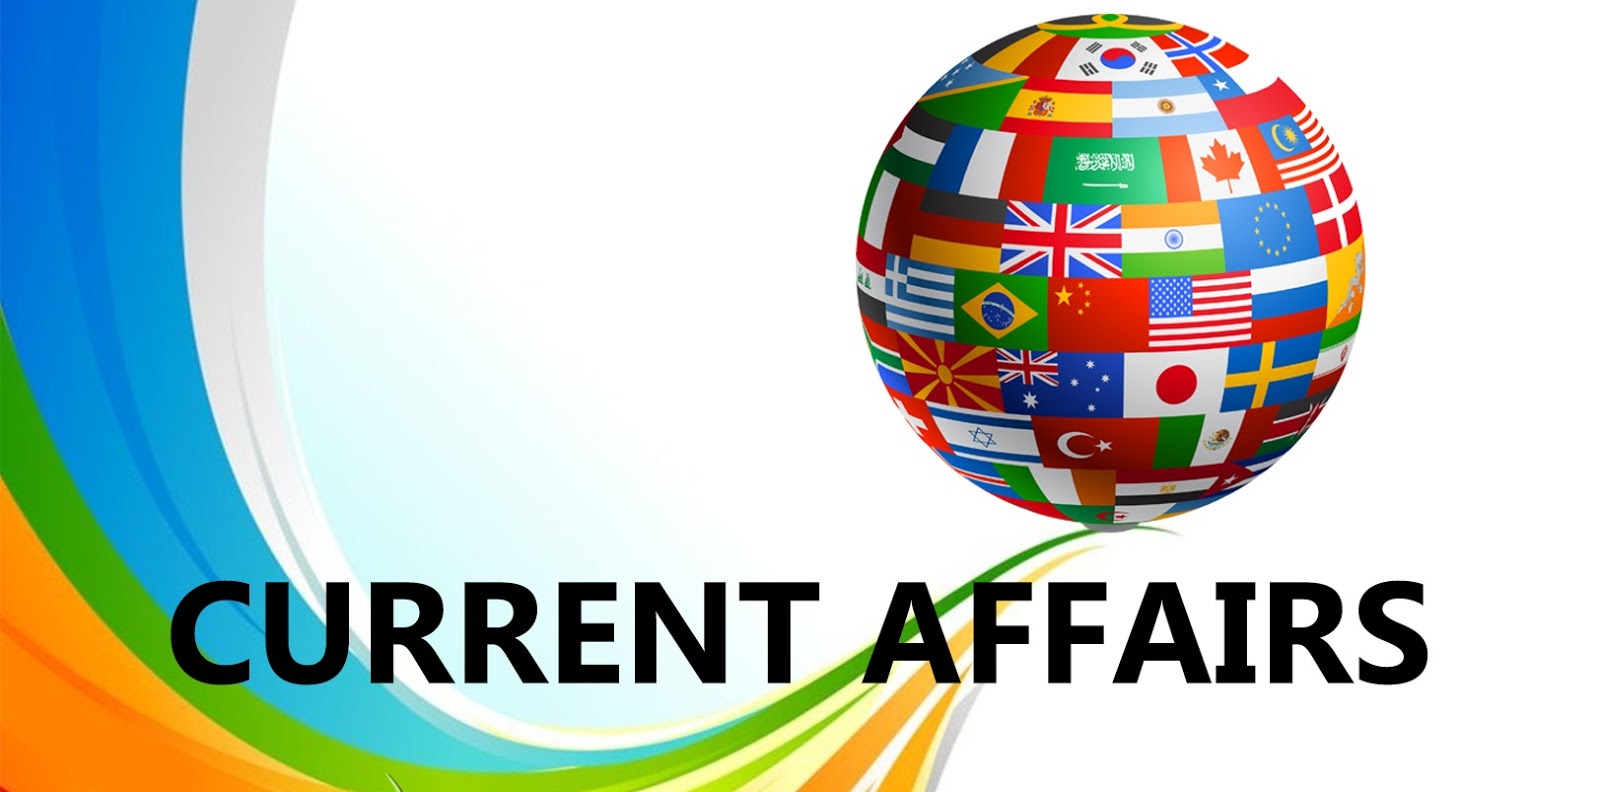 best topics for presentation on current affairs